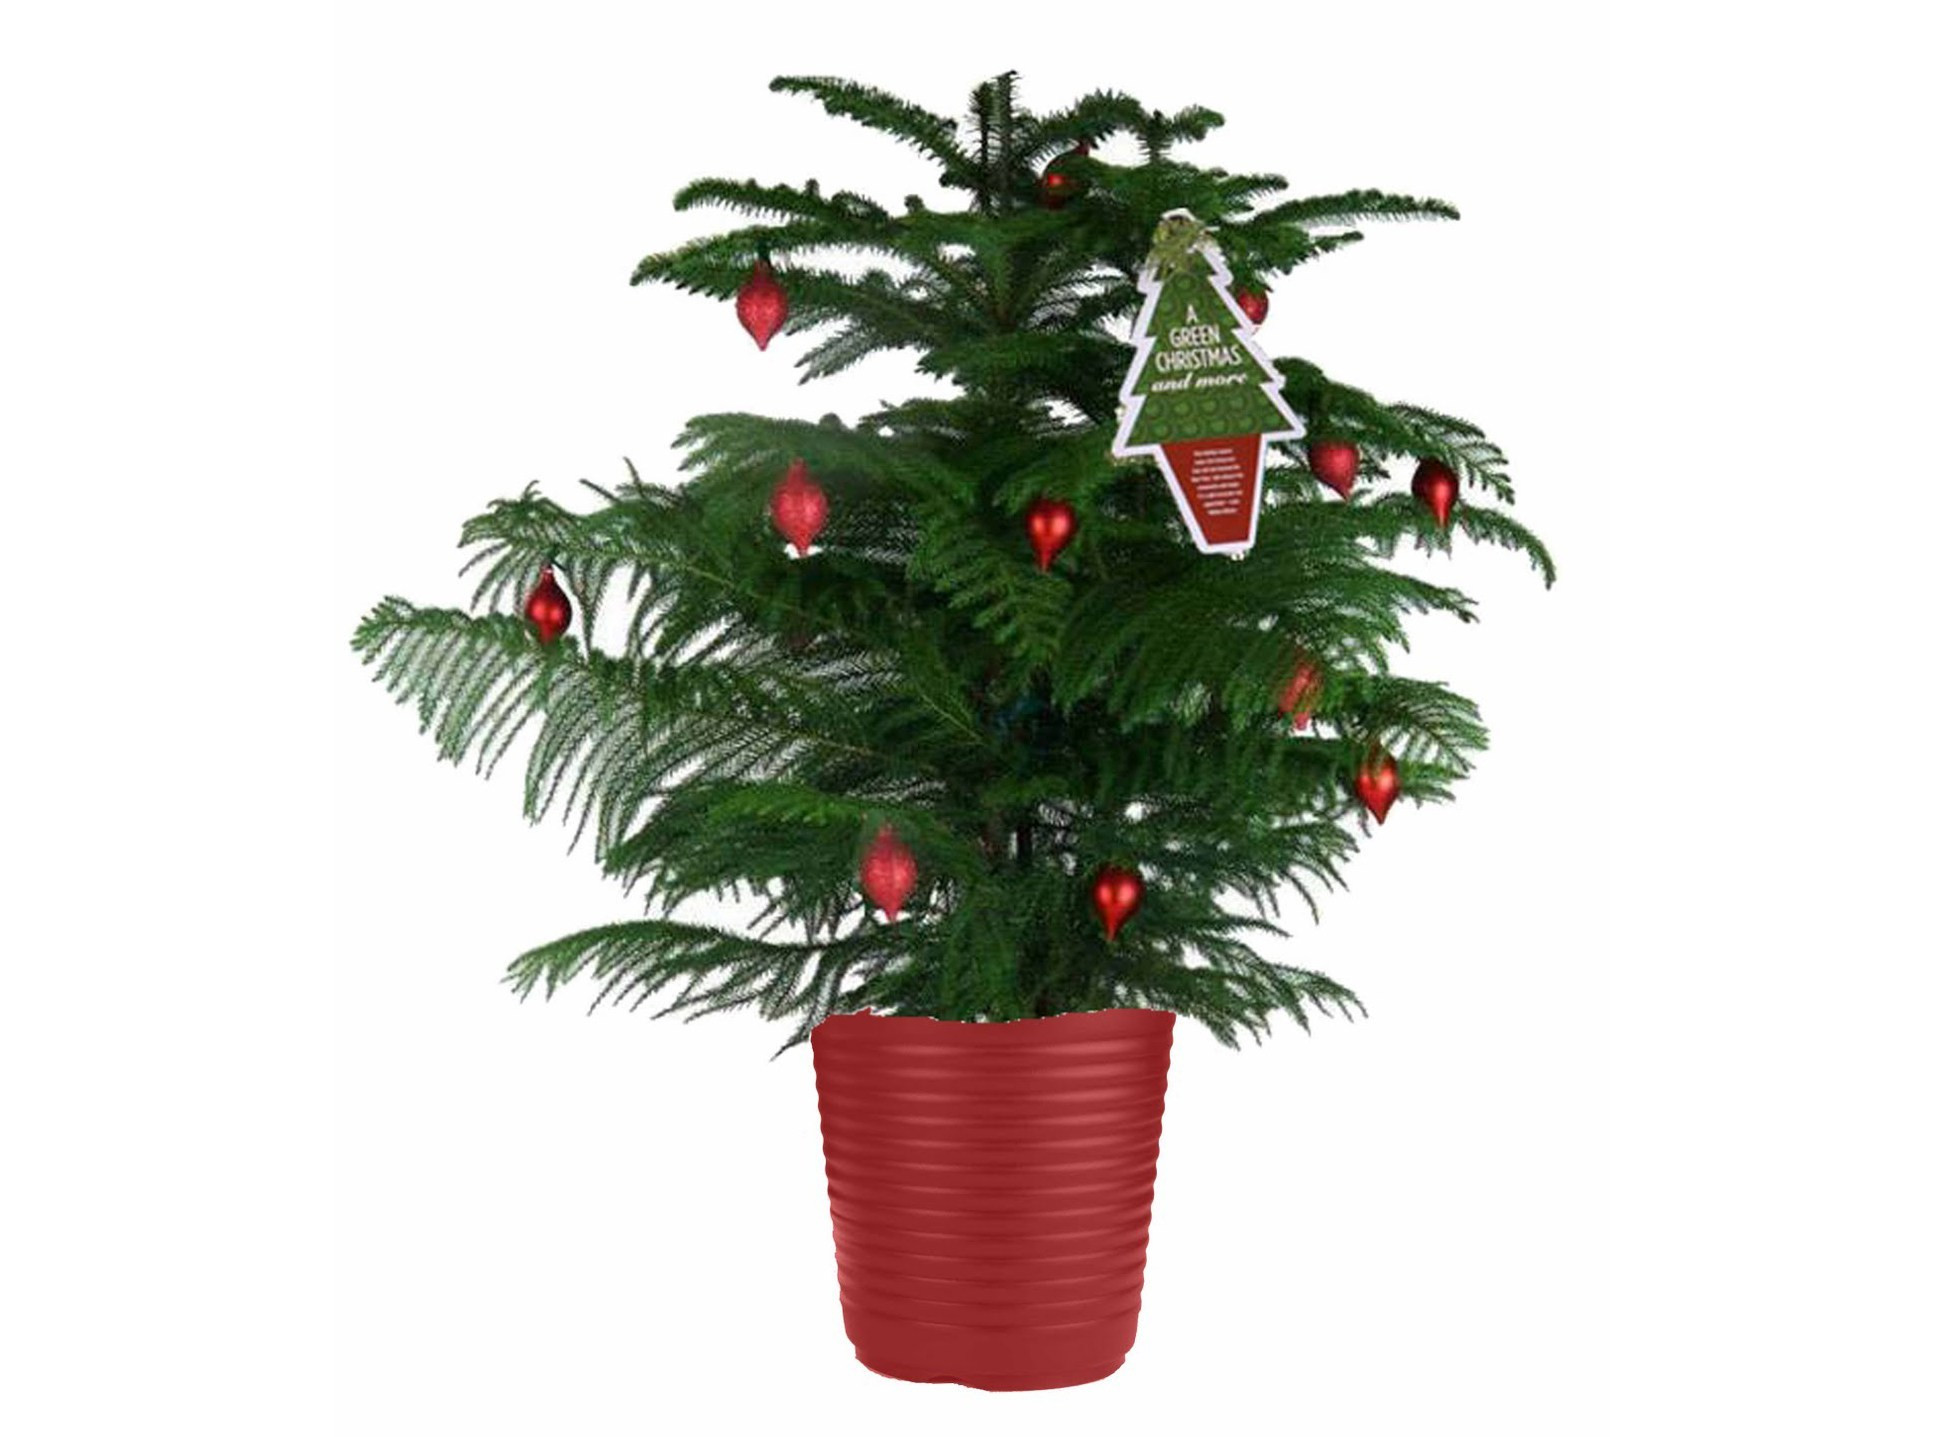 Christmas Tree Indoor Plant
 How To Care For Your Potted Norfolk Pine Christmas Tree